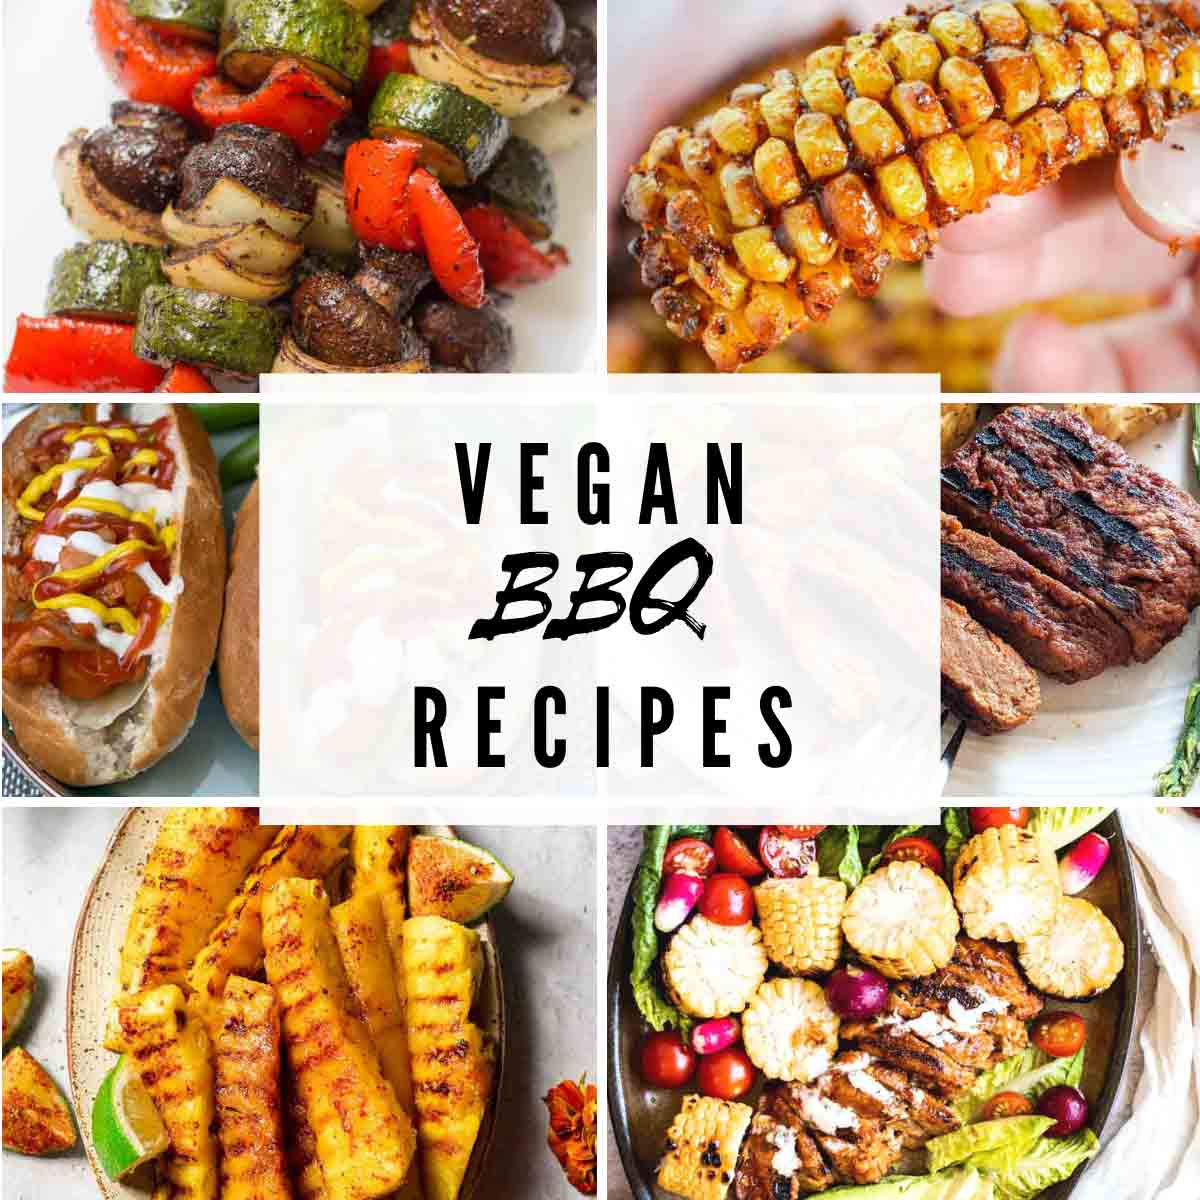 Vegan Bbq Recipes Image Collage With Text Overlay